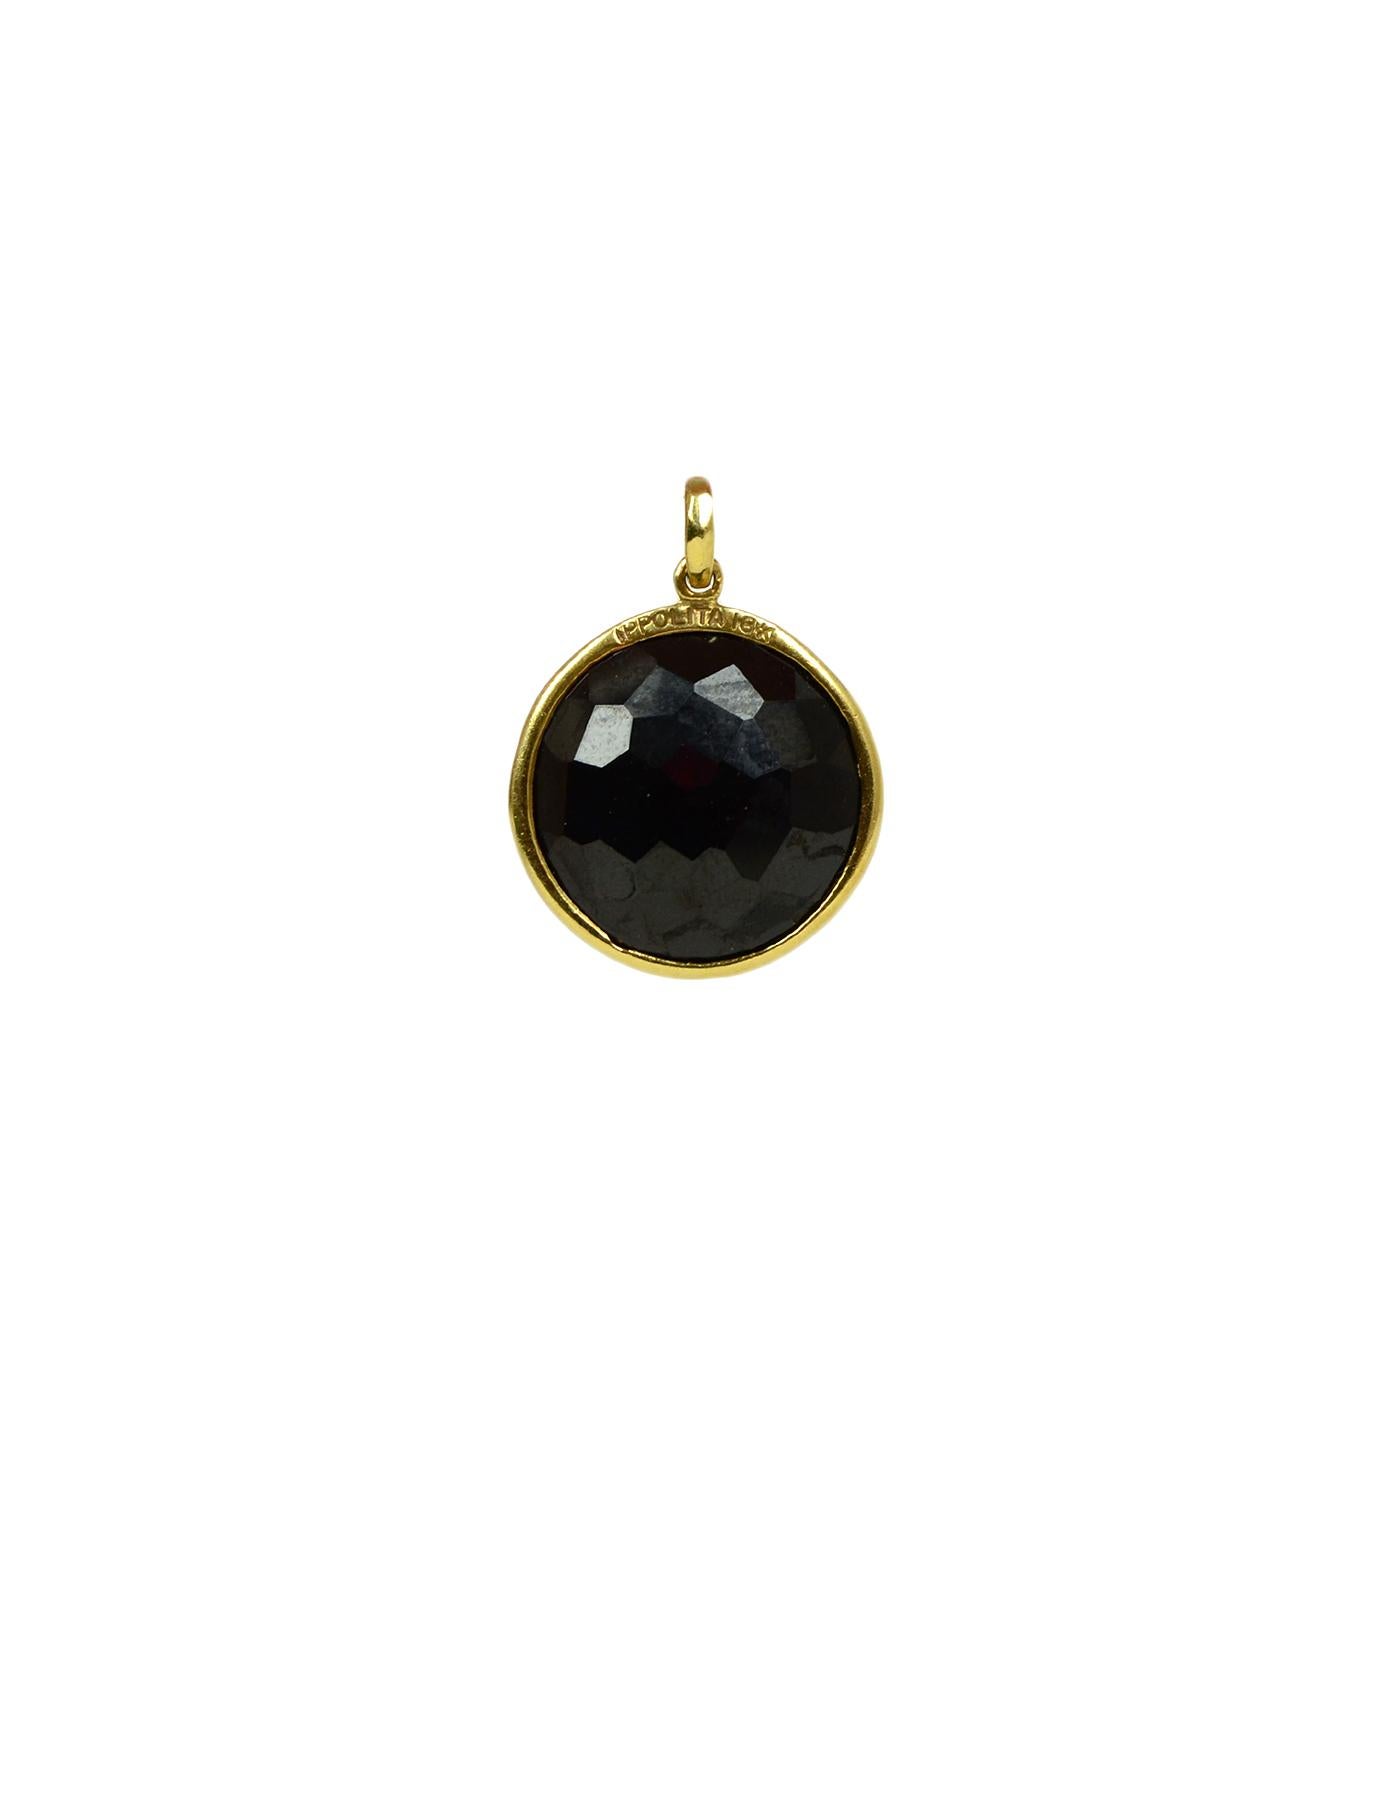 Ippolita Black Onyx Bezel Charm/Pendant For Necklace Set in 18K Gold In Excellent Condition In New York, NY